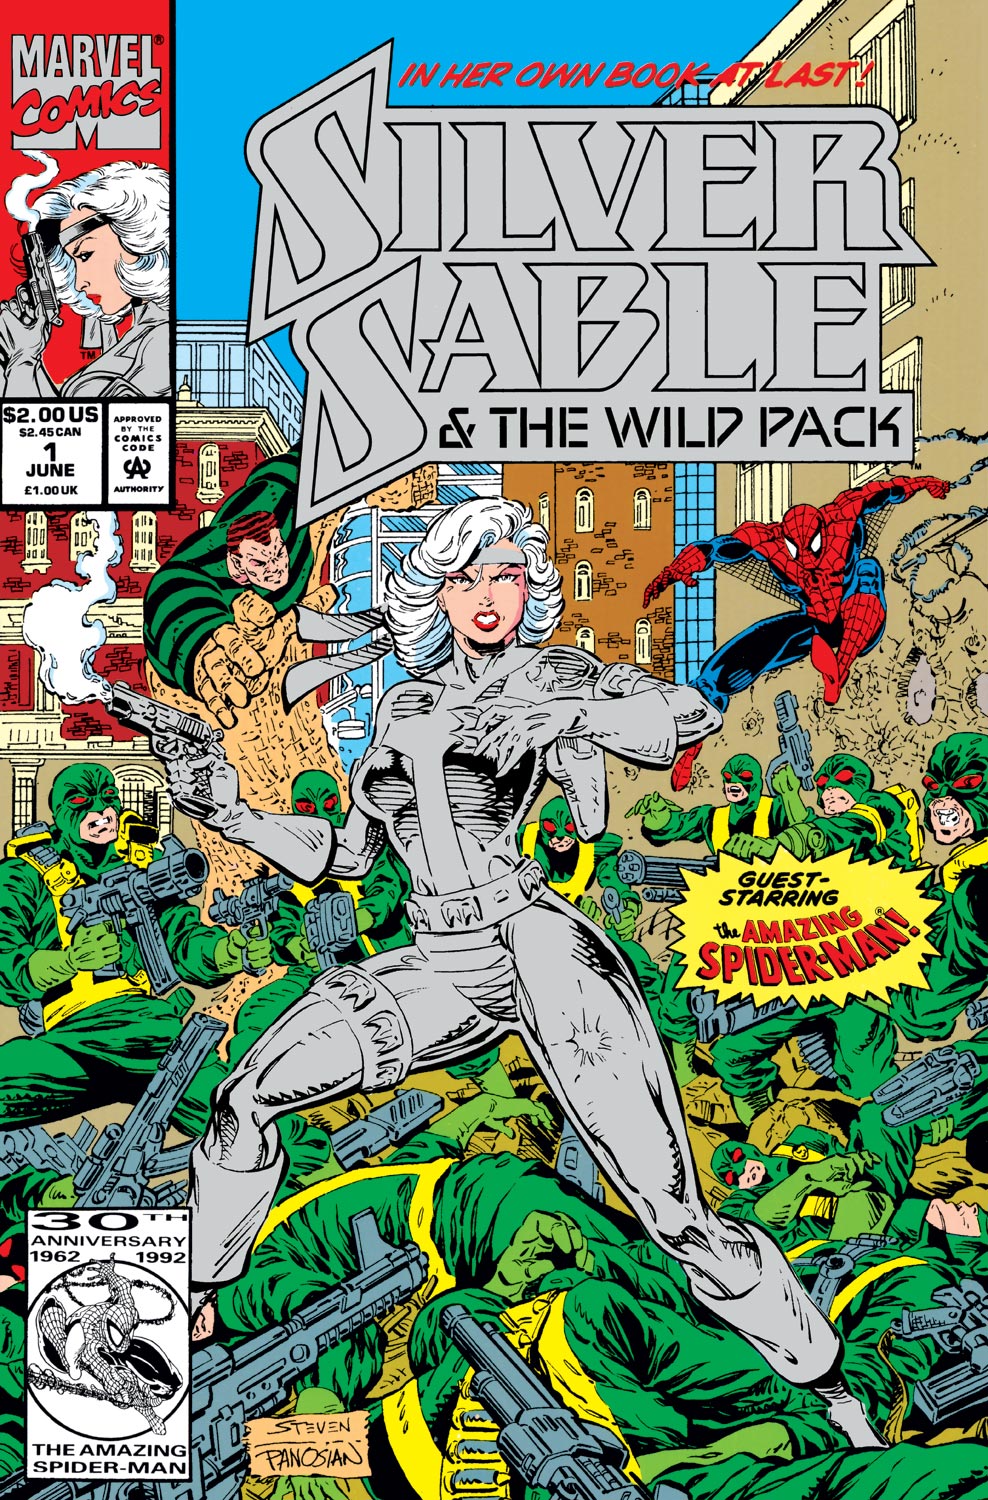 Silver Sable and the Wild Pack (1992) #1 | Comic Issues | Marvel